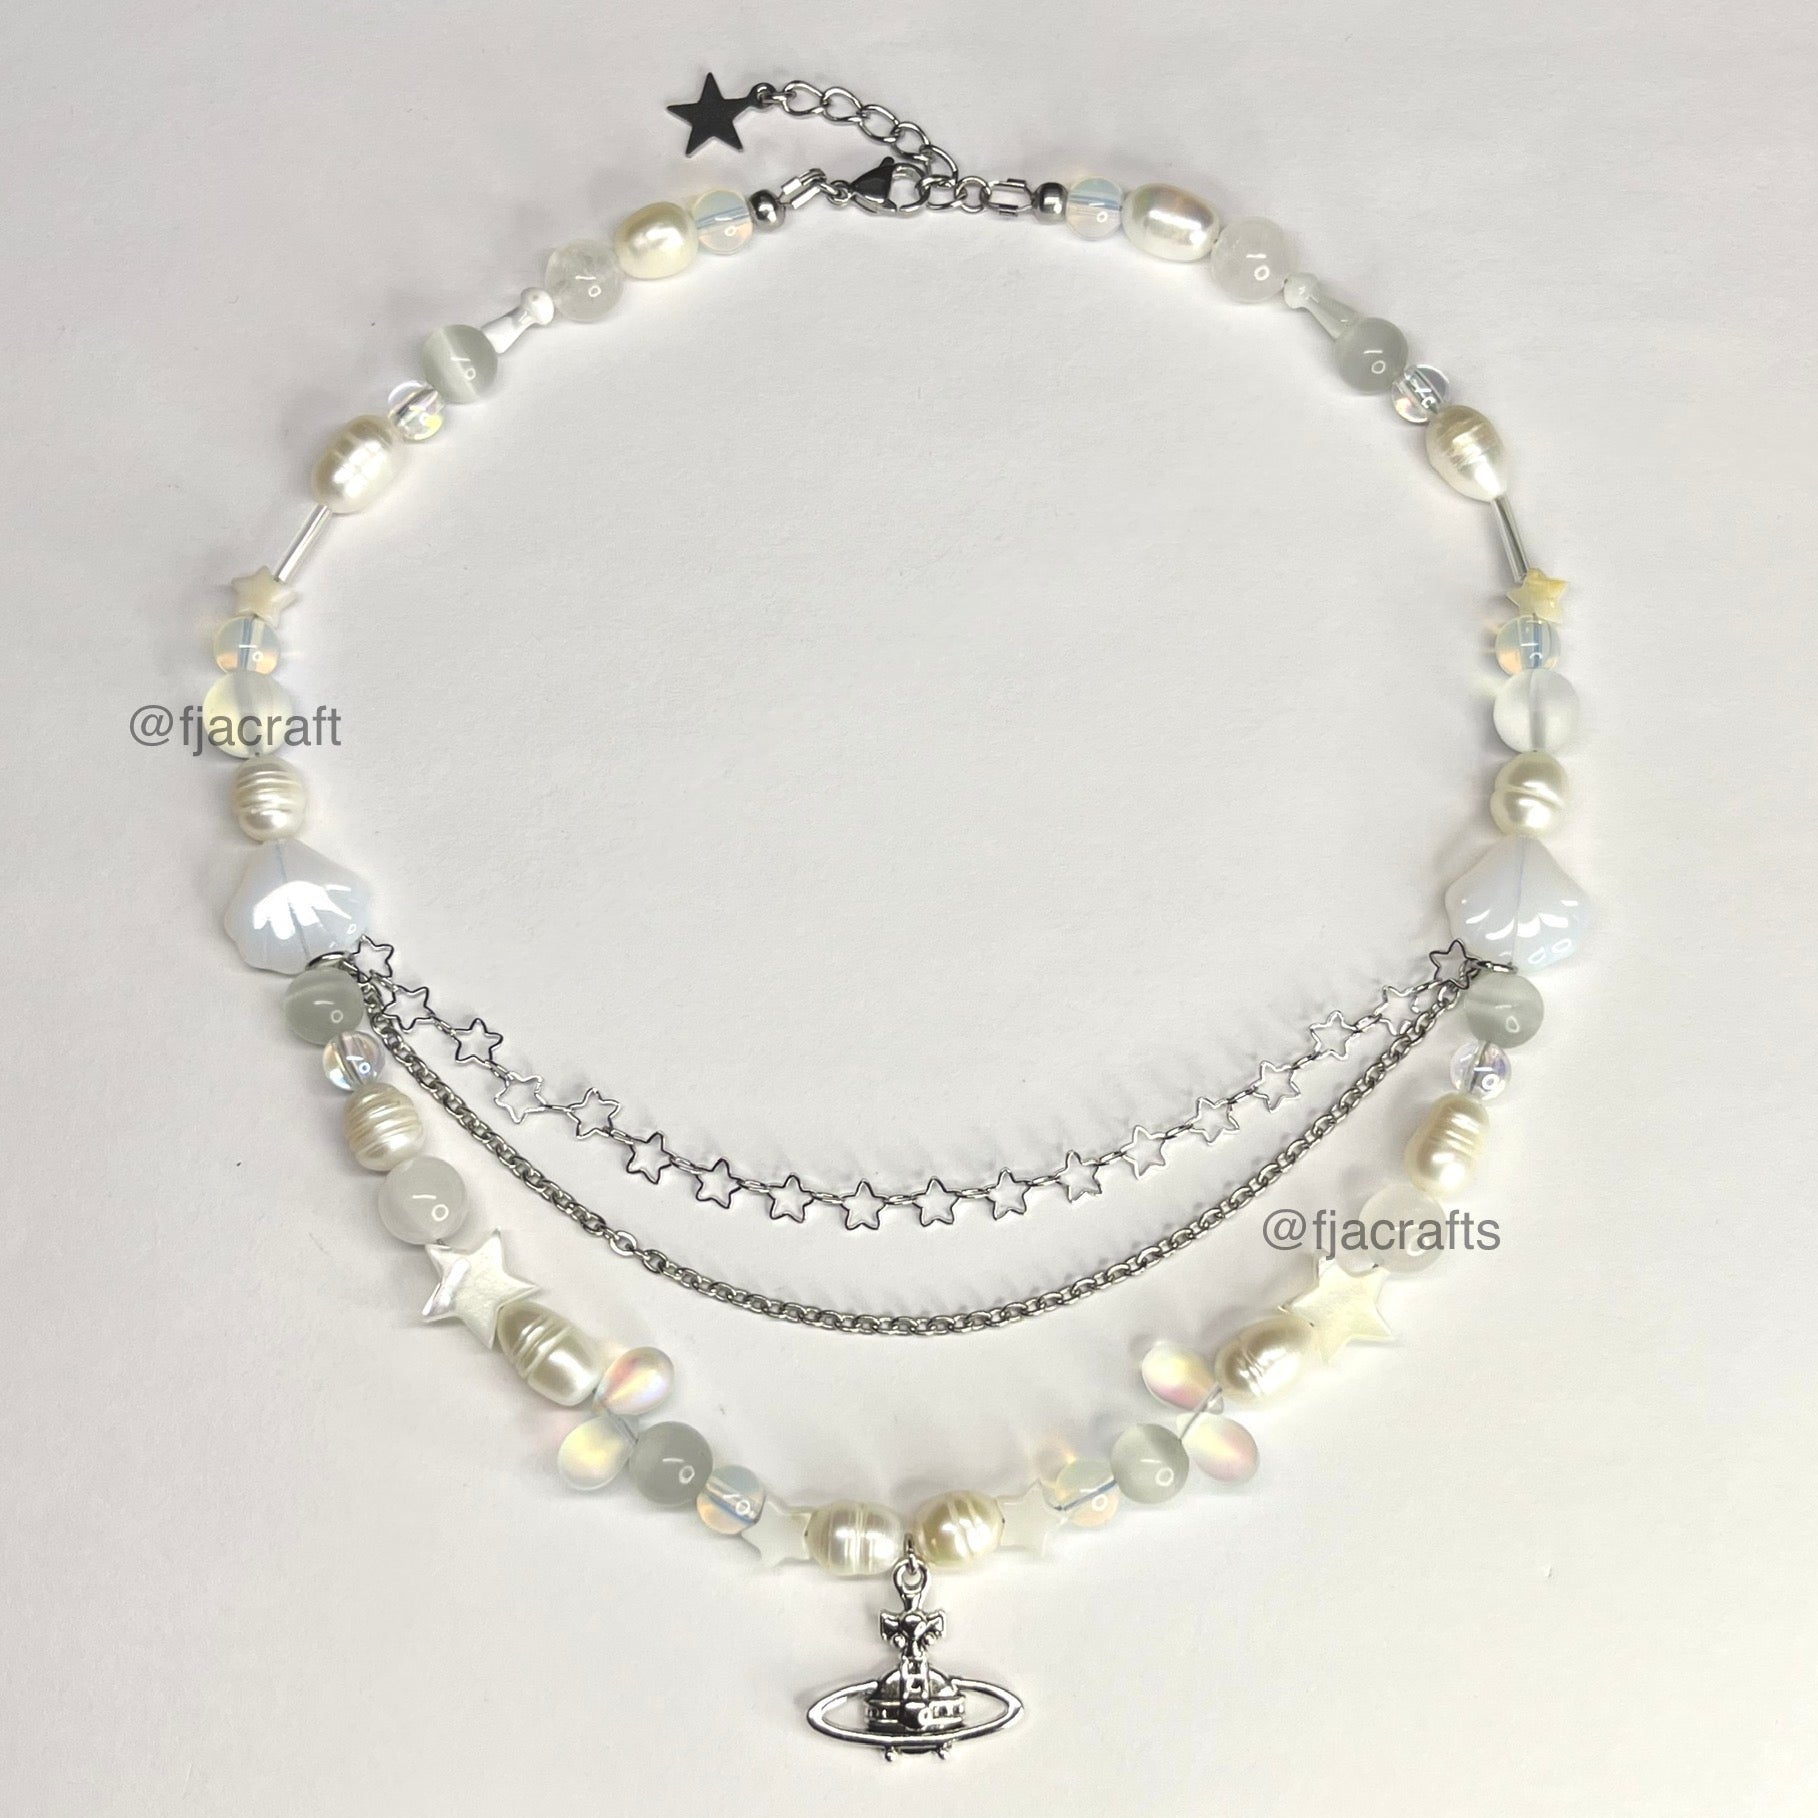 West Star Pearl Necklace | stars, chains | freshwater iridescent pearlescent white gray FJA Crafts